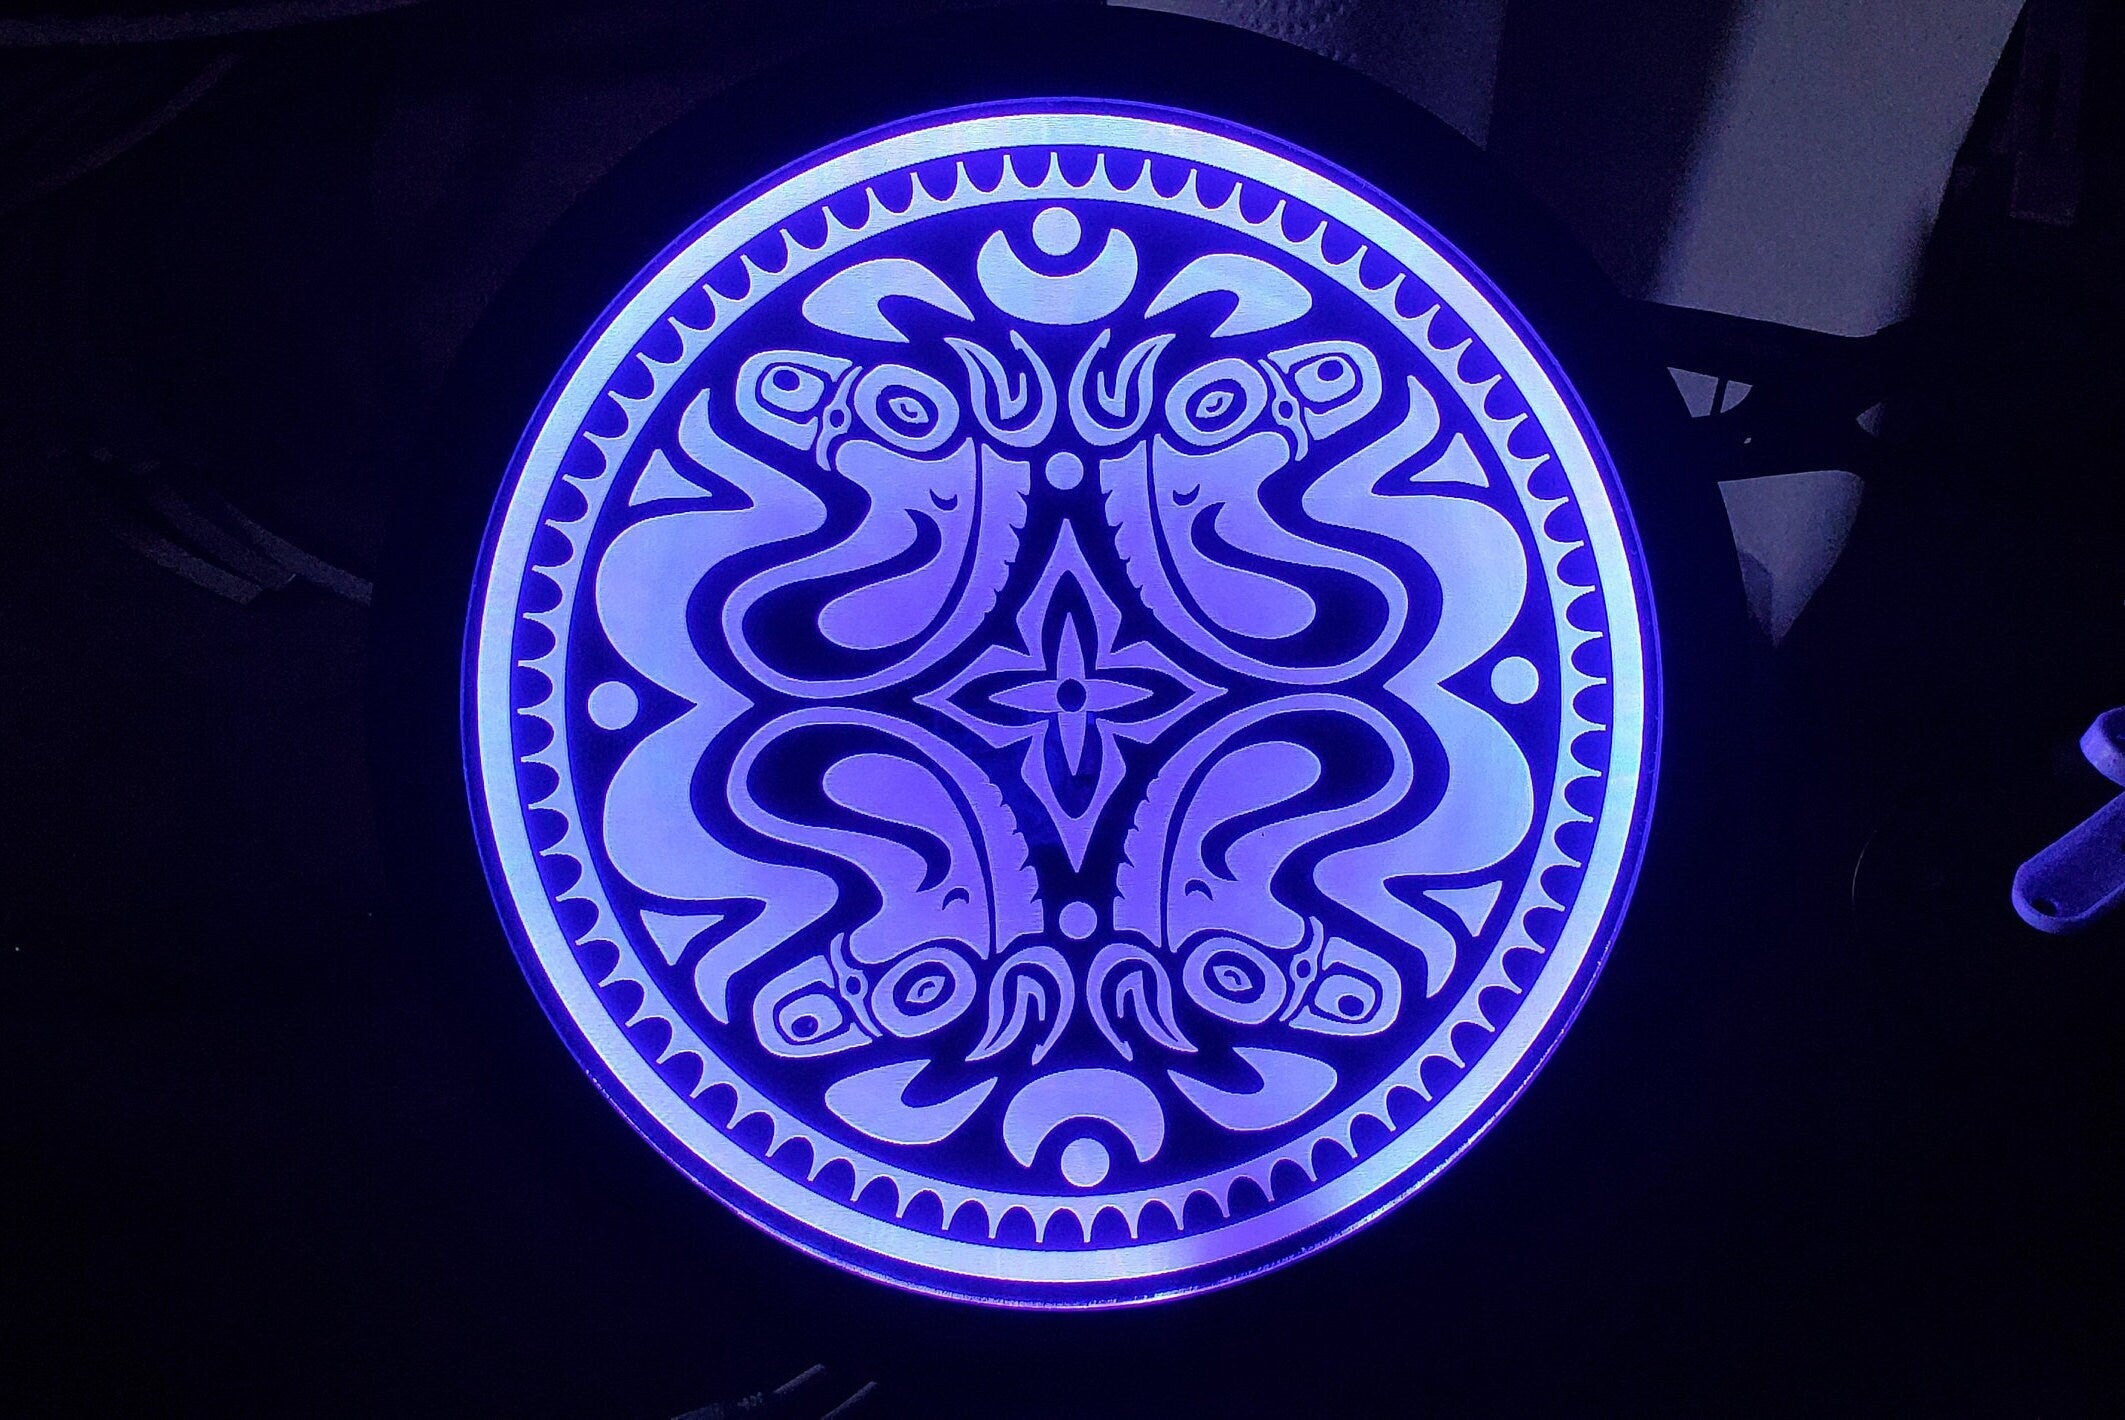 Gov't Mule 4 mule LED Wall Sign Neon Like - Color Changing Remote Control - 6 Sizes - Made in USA- Free Shipping